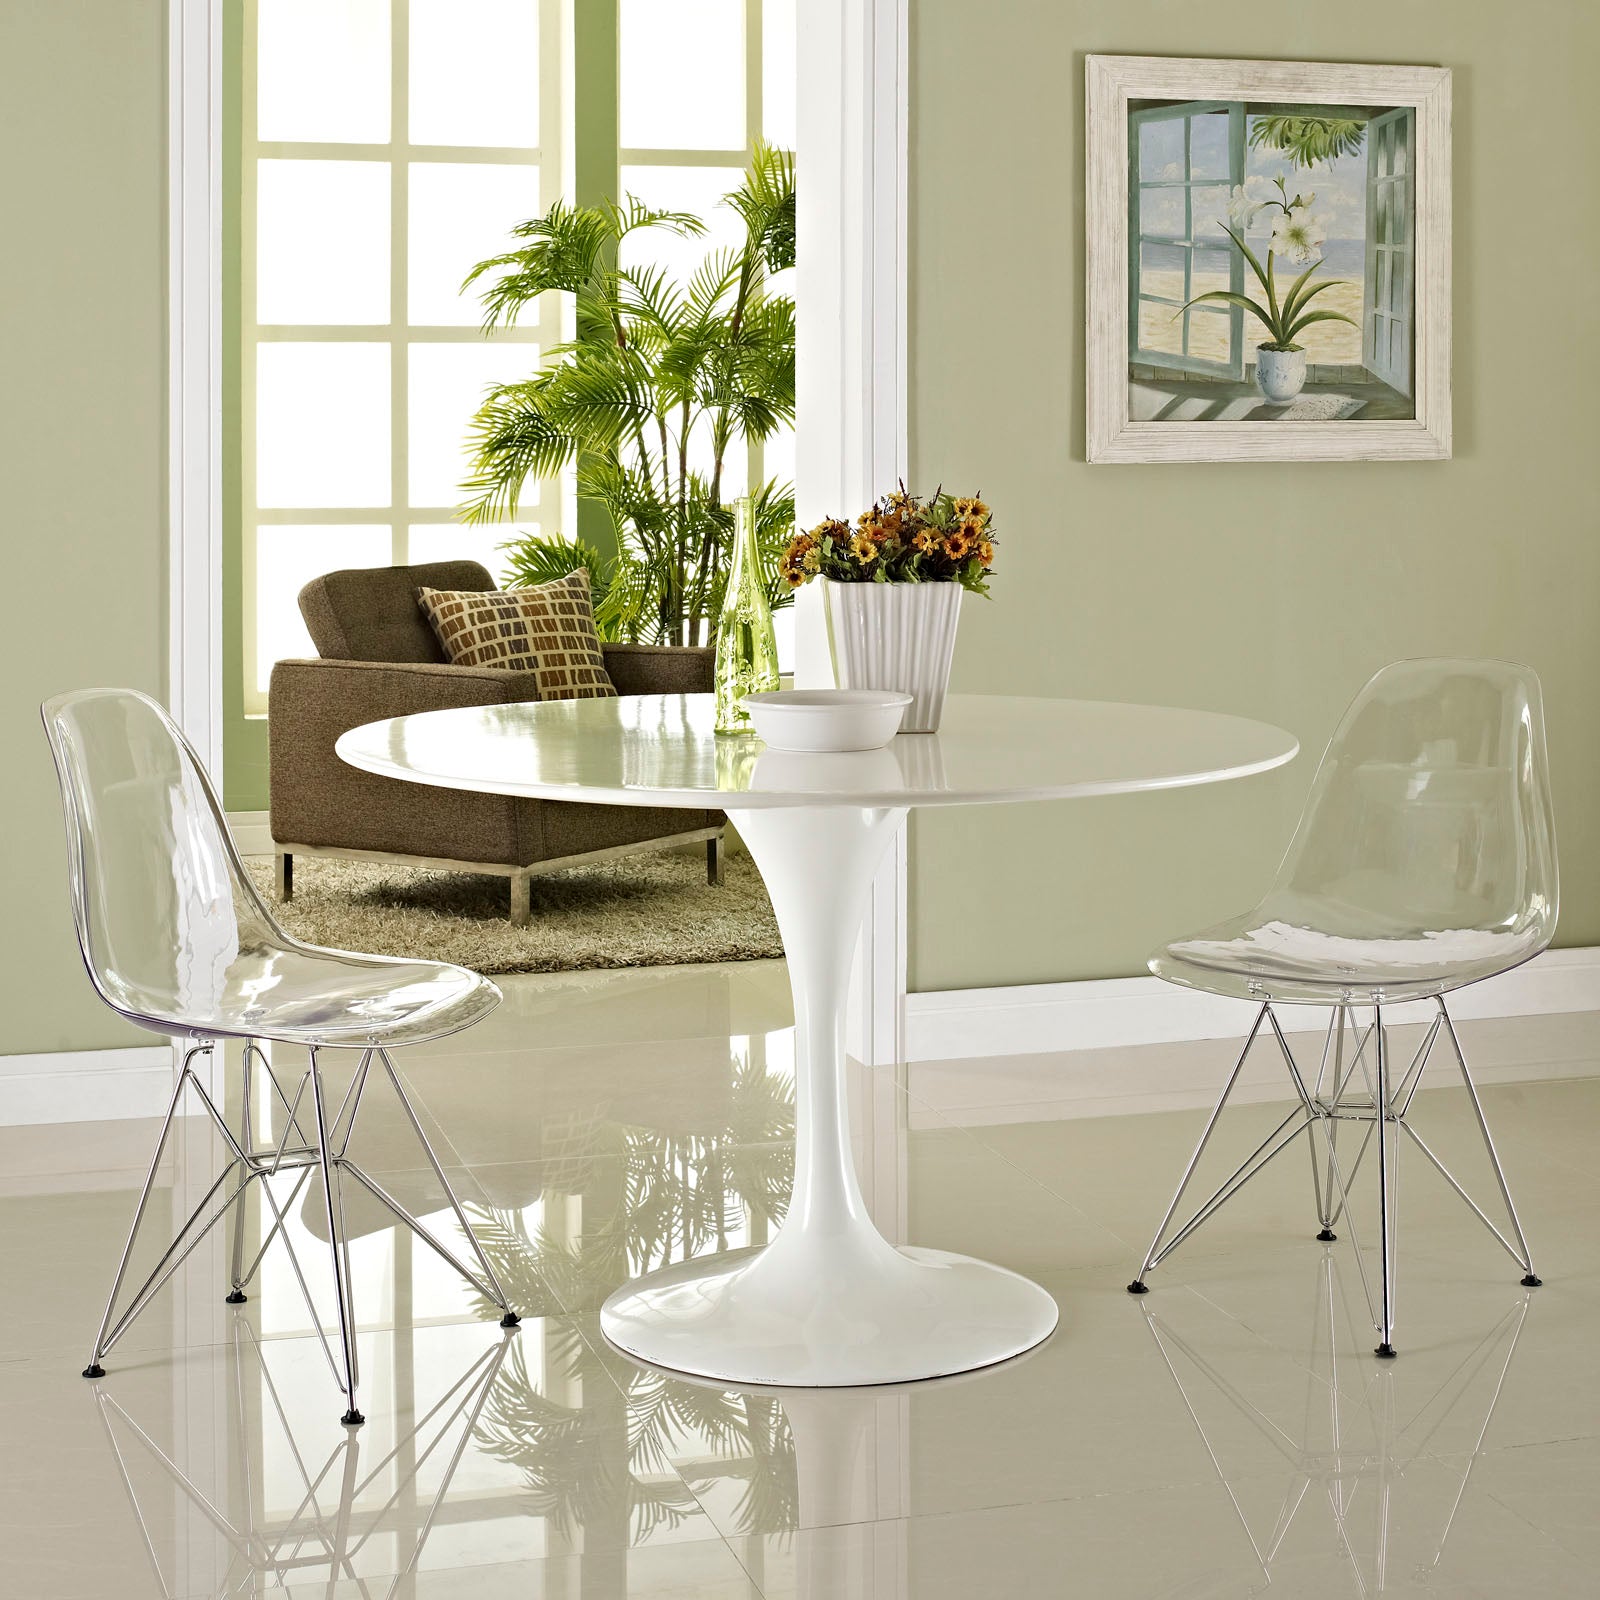 Paris Dining Side Chair Set of 2 - East Shore Modern Home Furnishings